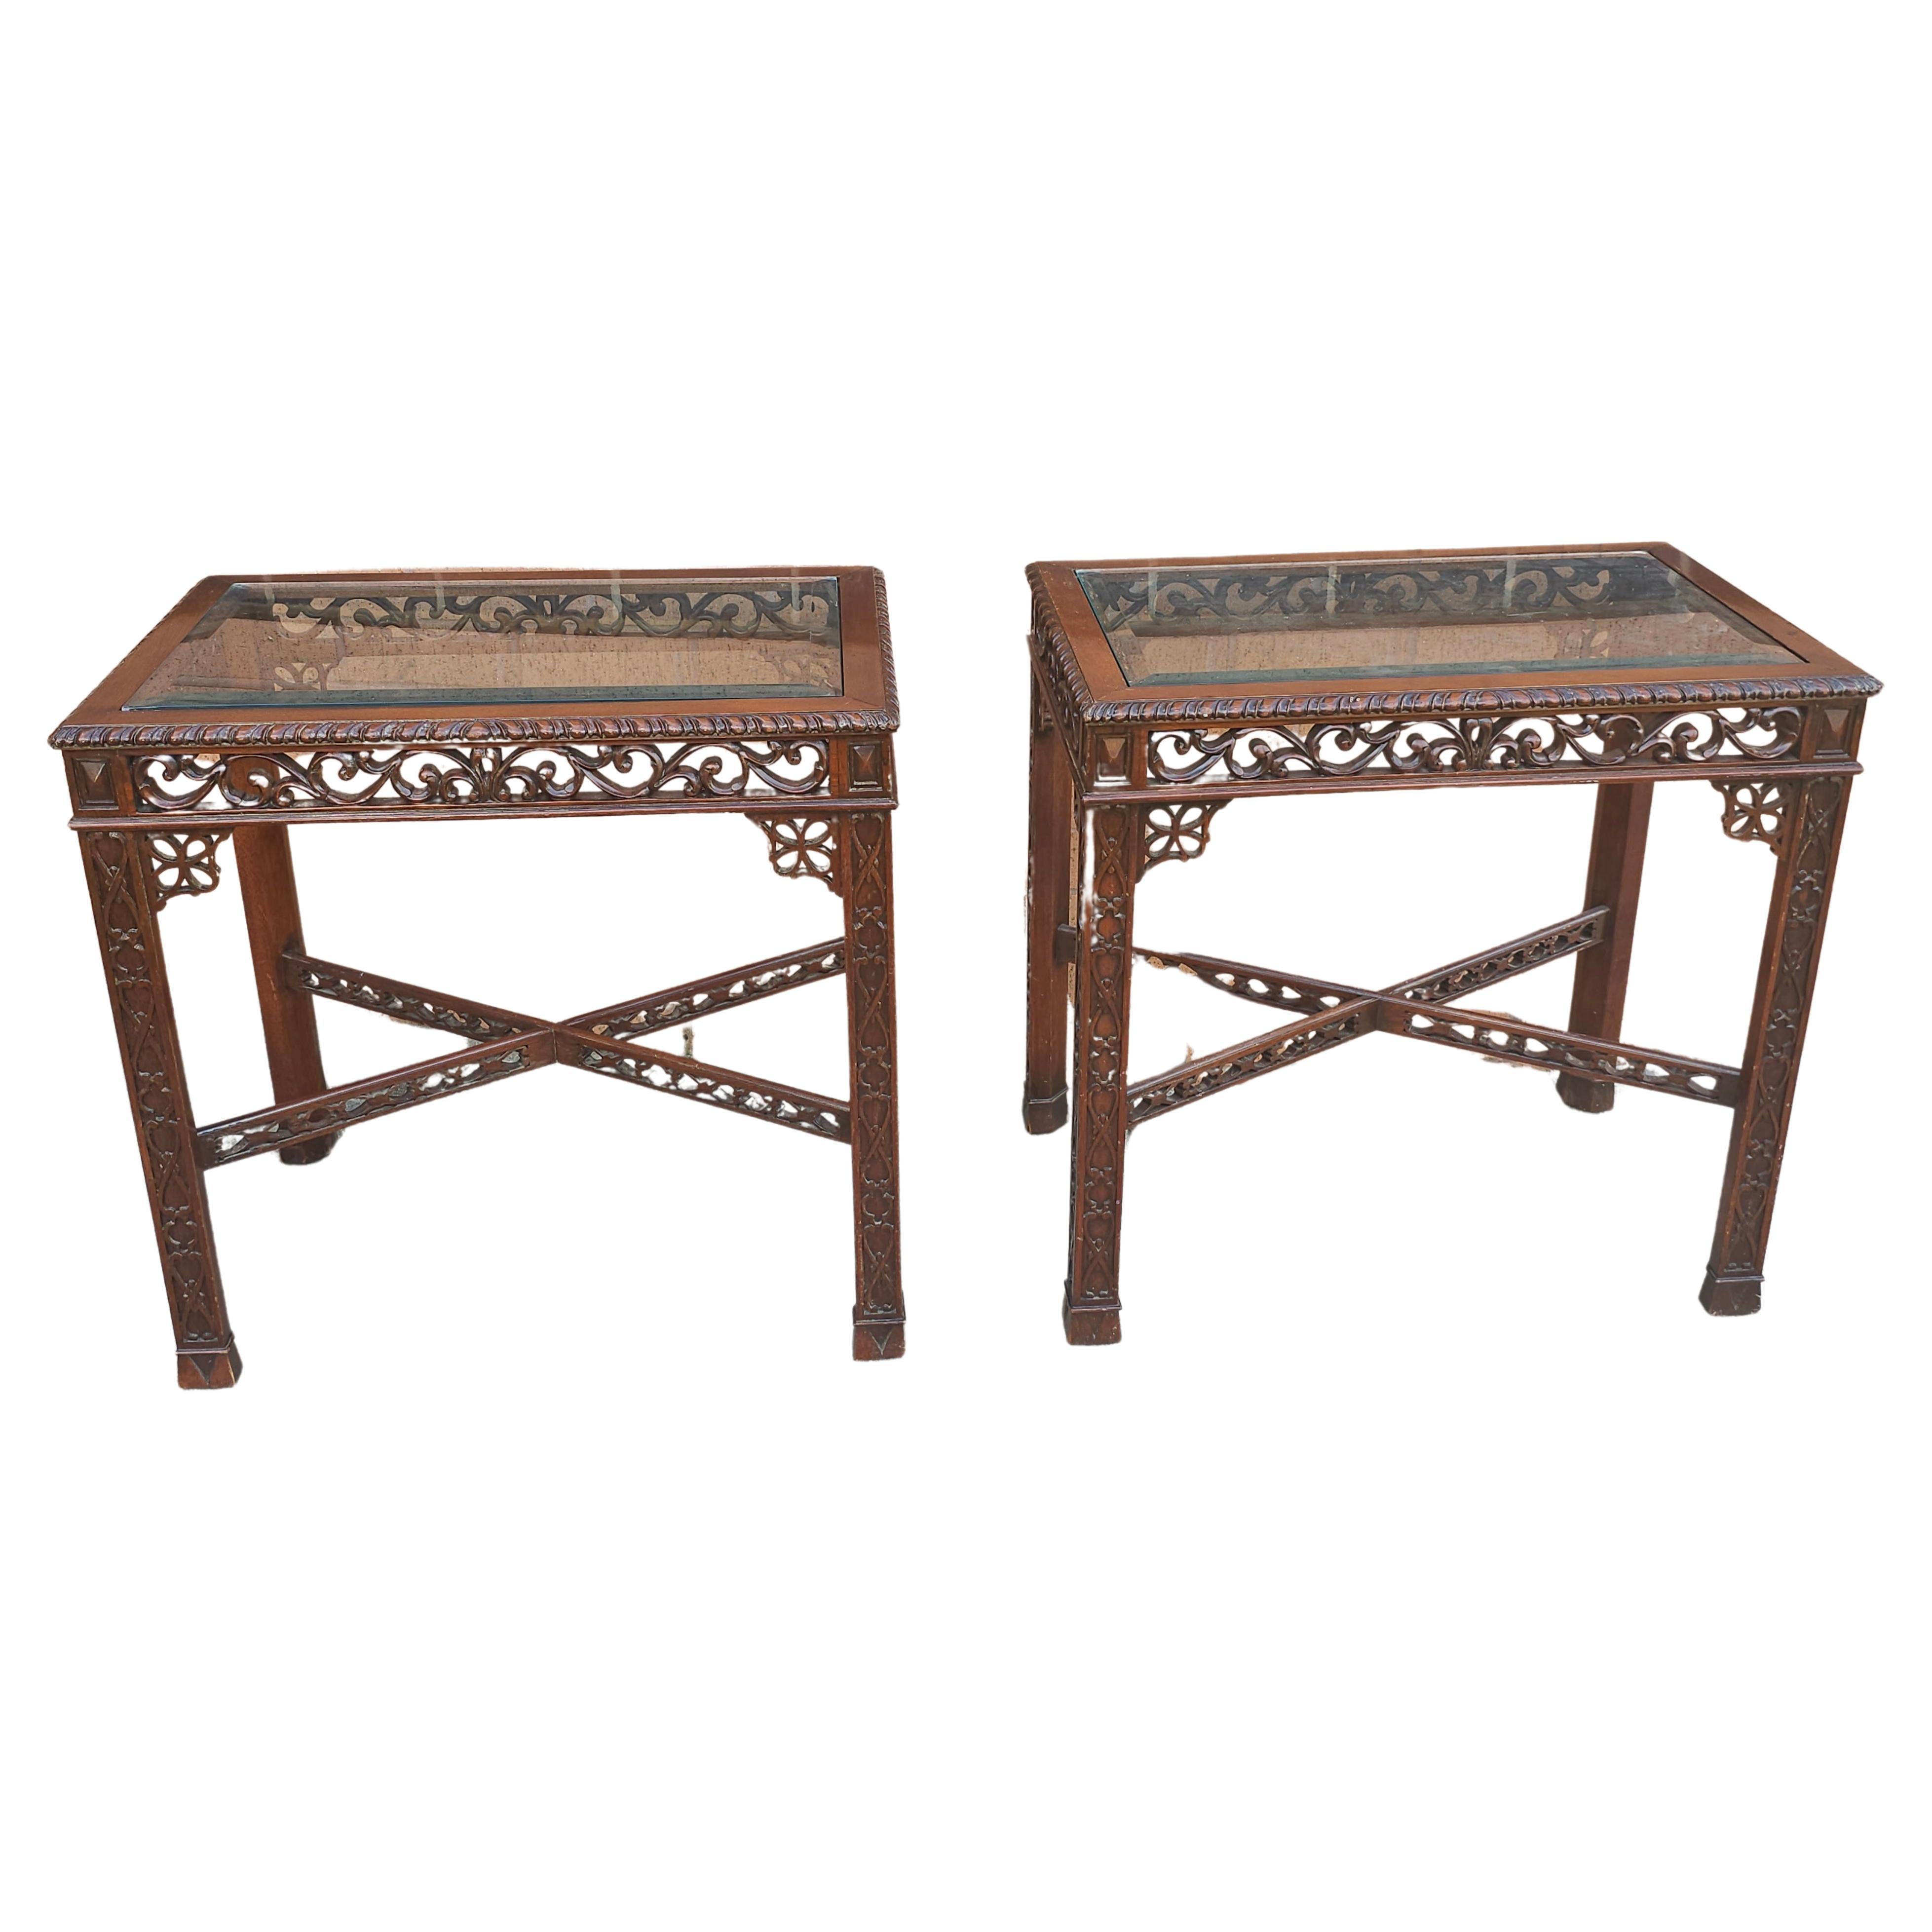 A Pair Of Chinese Chippendale Style with a mixture of transparent and blind fretworks throughout and beveled Glass Inset Mahogany Side Tables. Measure 18.5